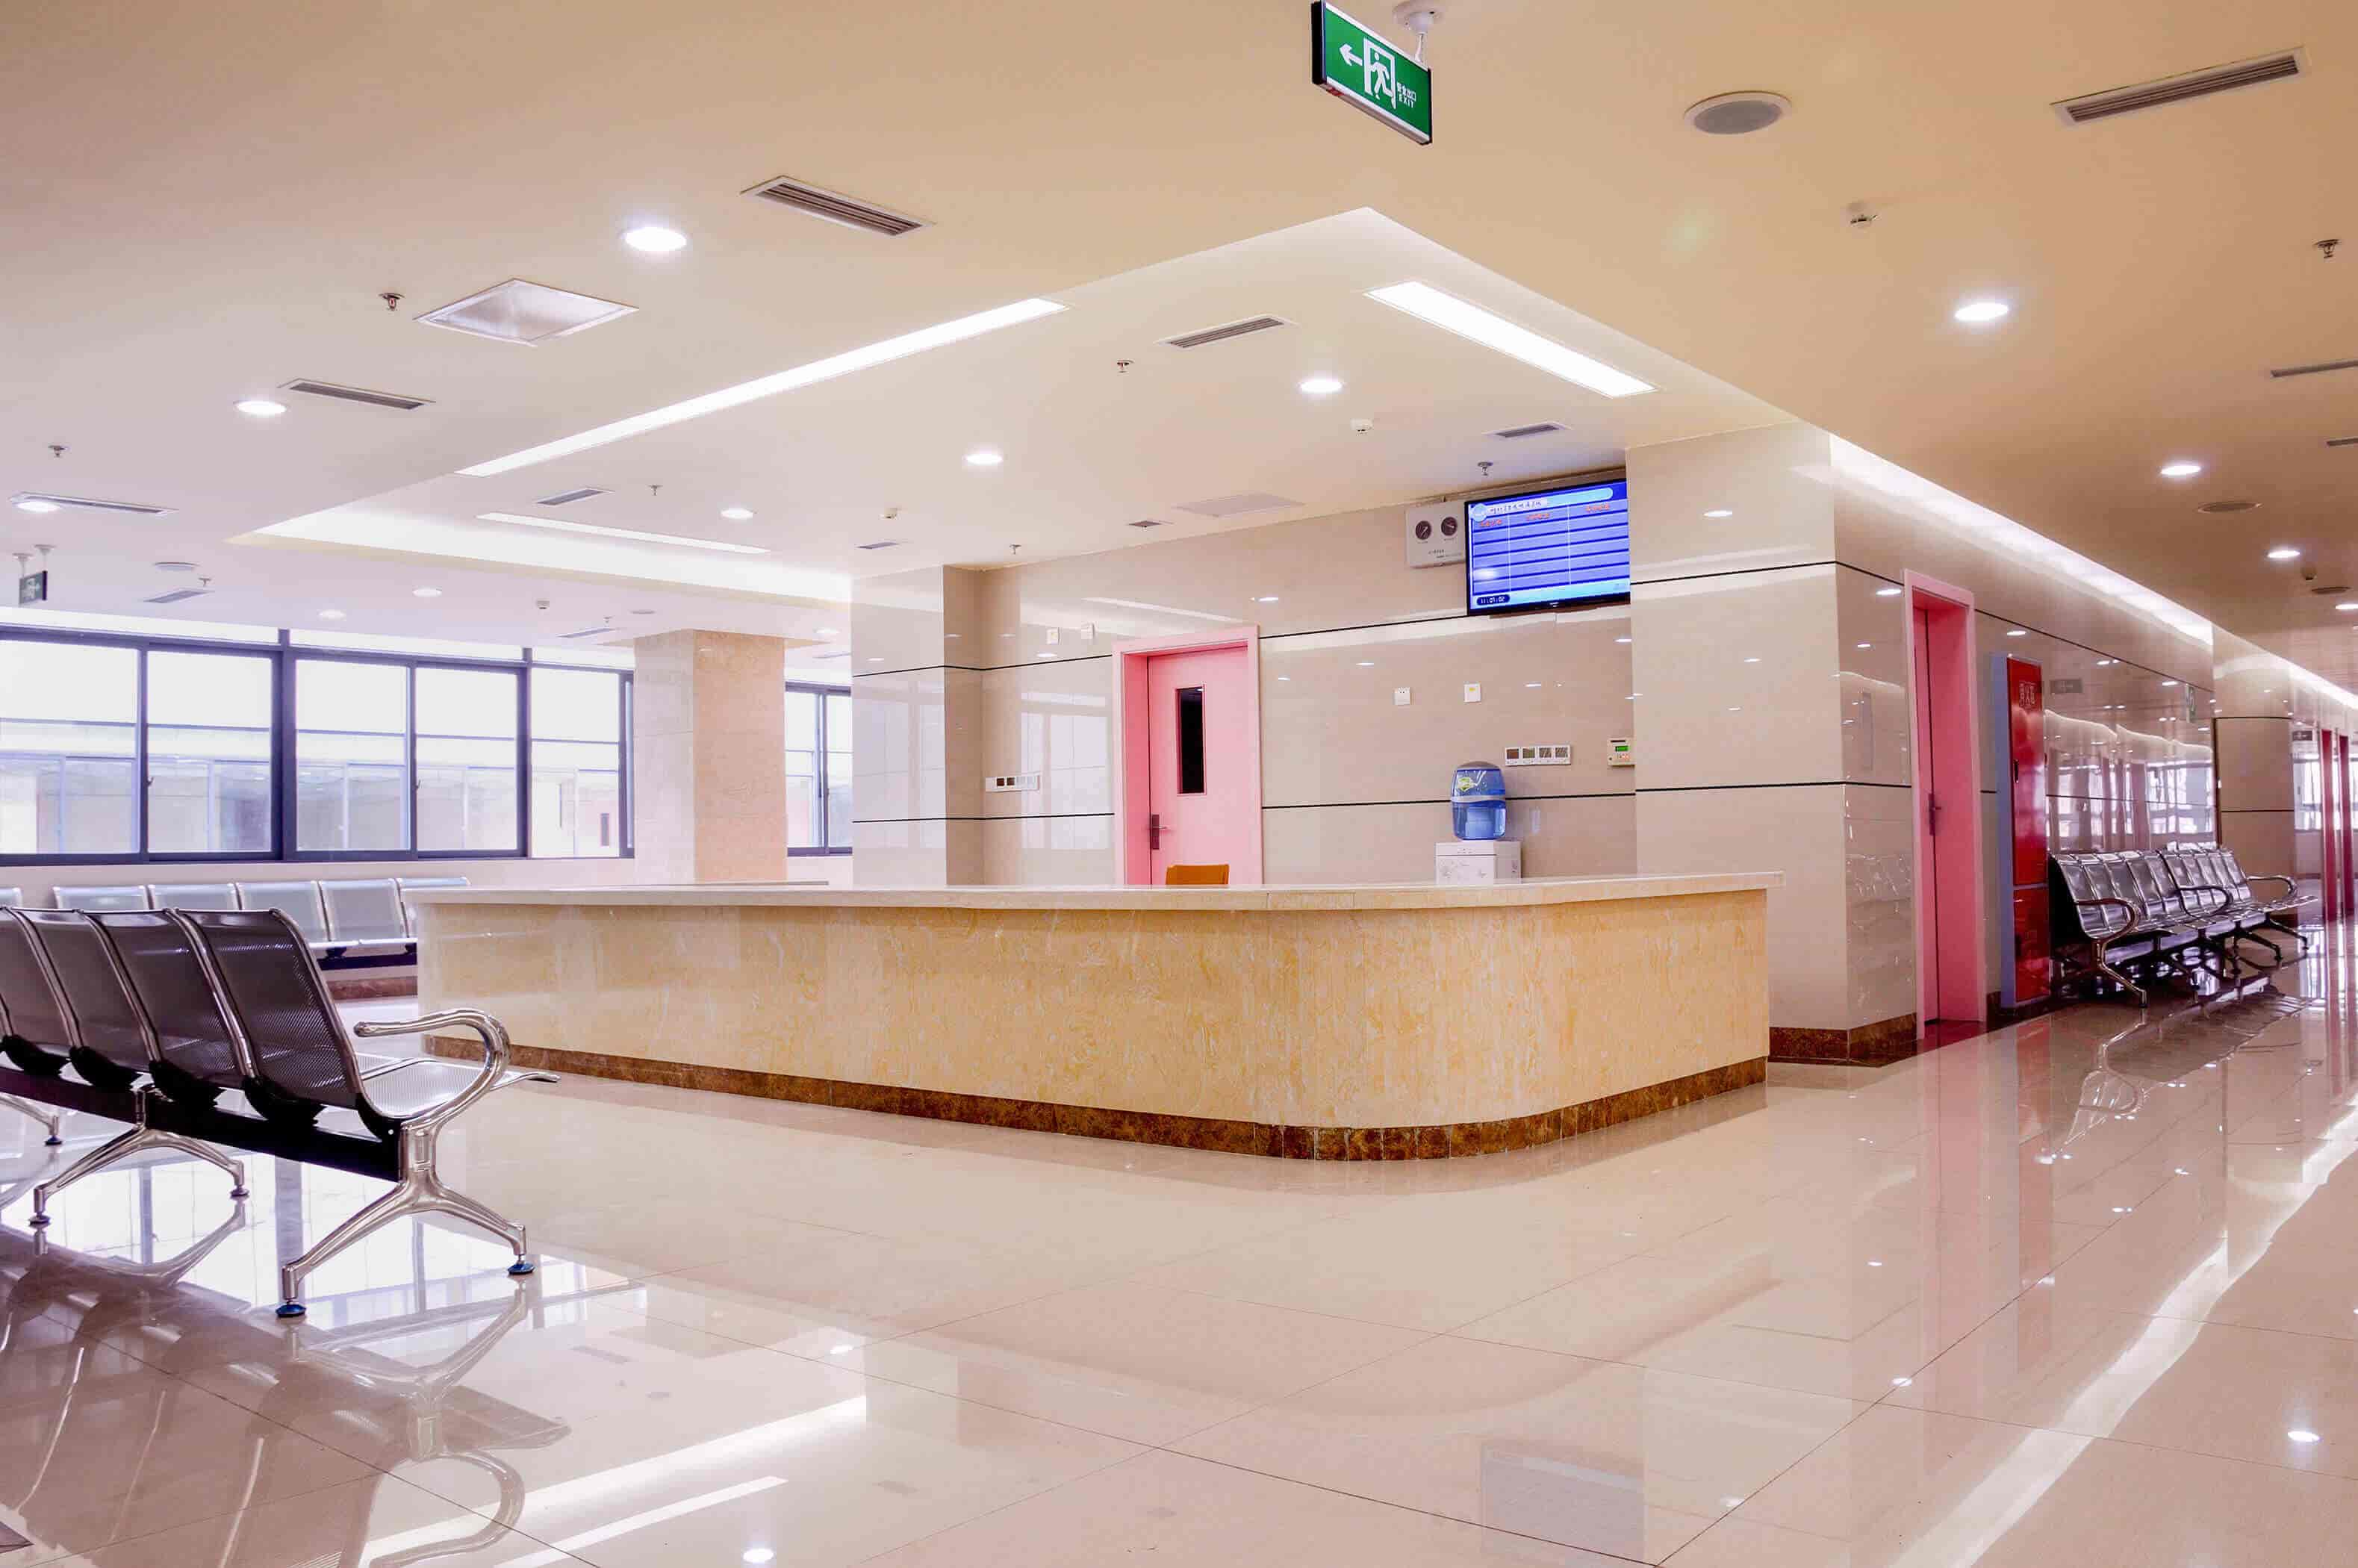 Hospital Interior Design to Reduce Stress and Anxiety